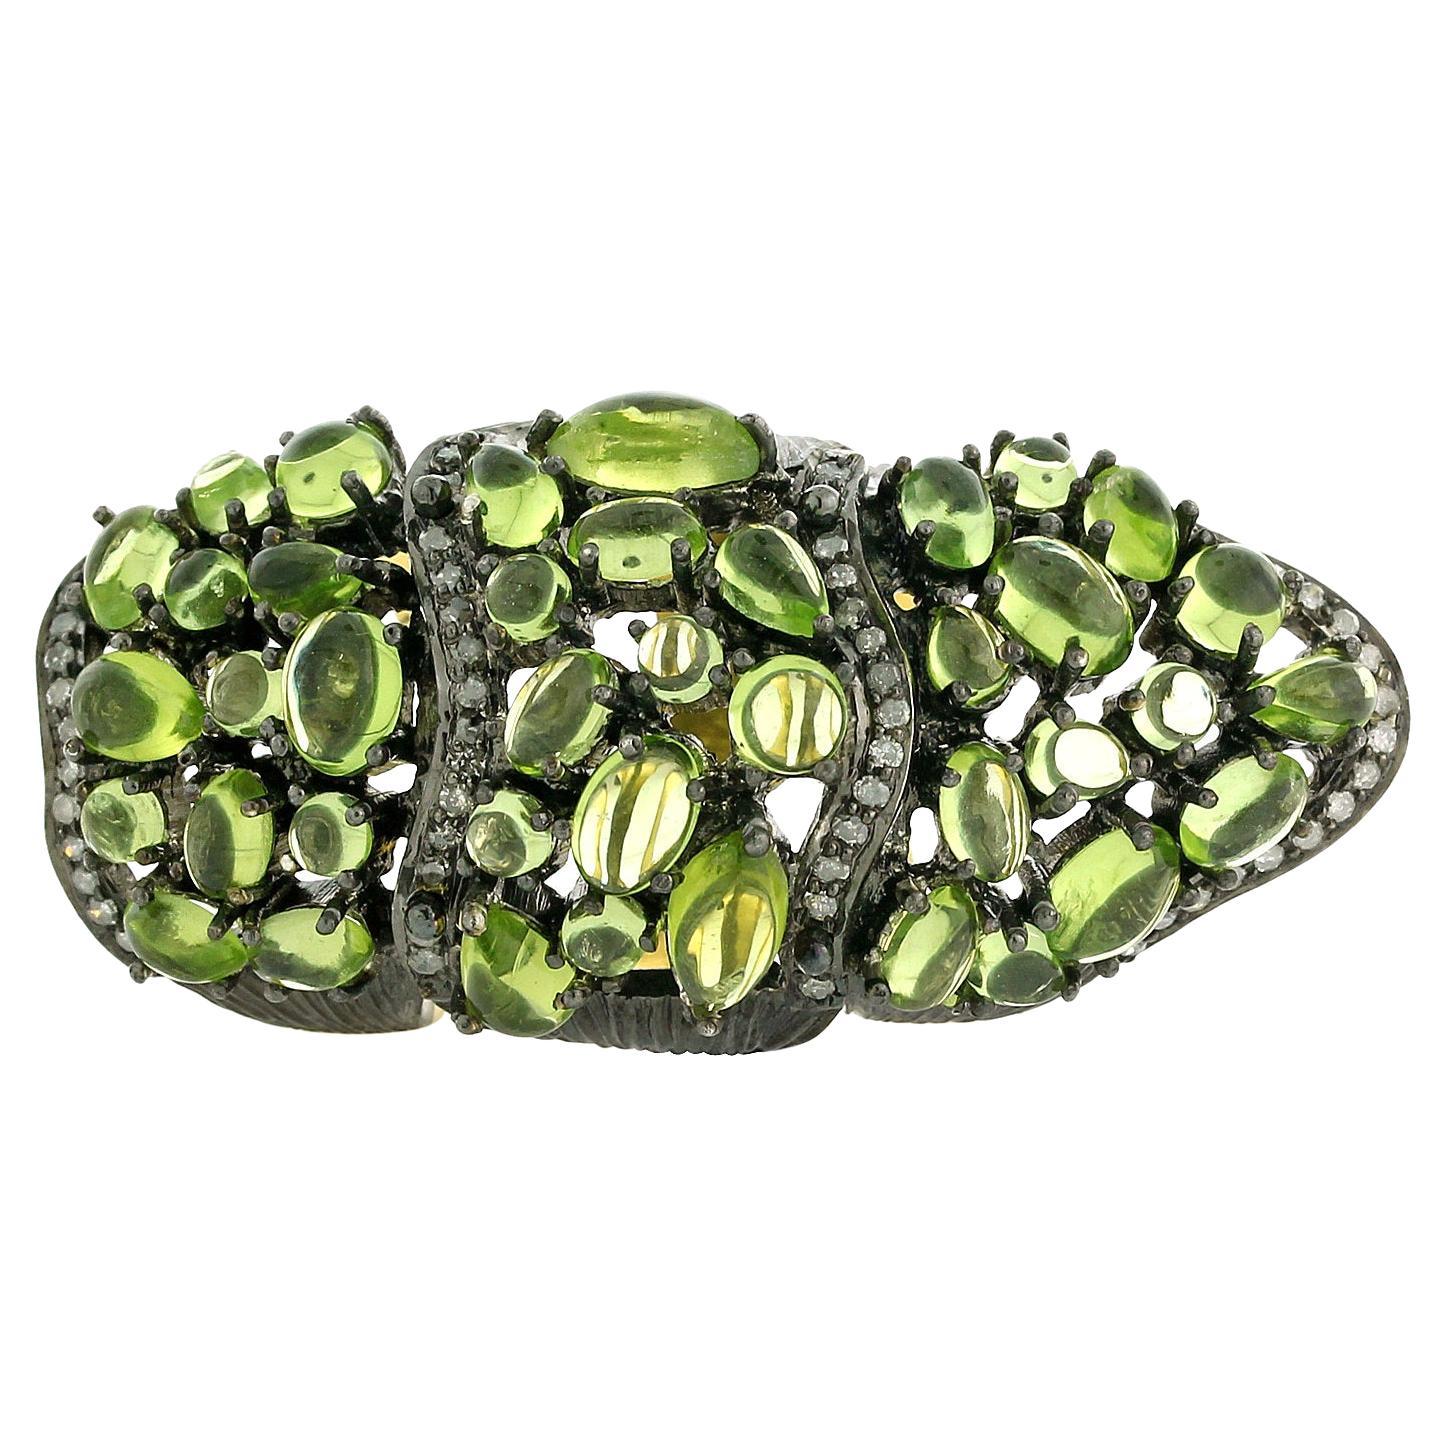 Uneven Shaped Peridot & Pave Diamonds Long Ring Made in 18k Gold & Silver